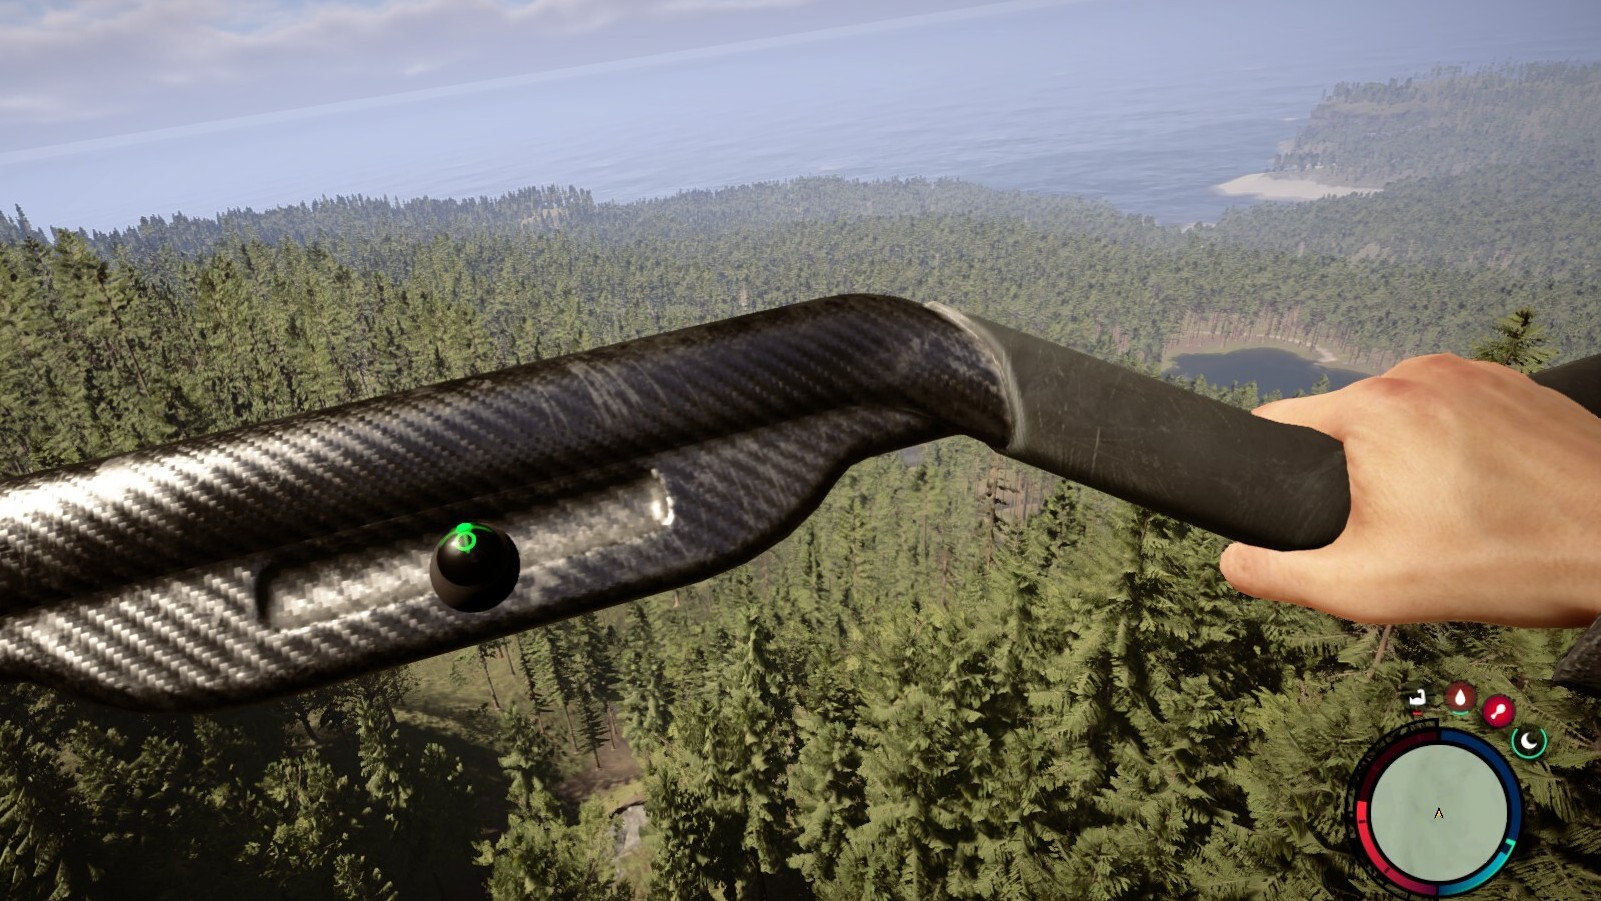 How to get Hang Glider in Sons of the Forest - Map with 6 Easy